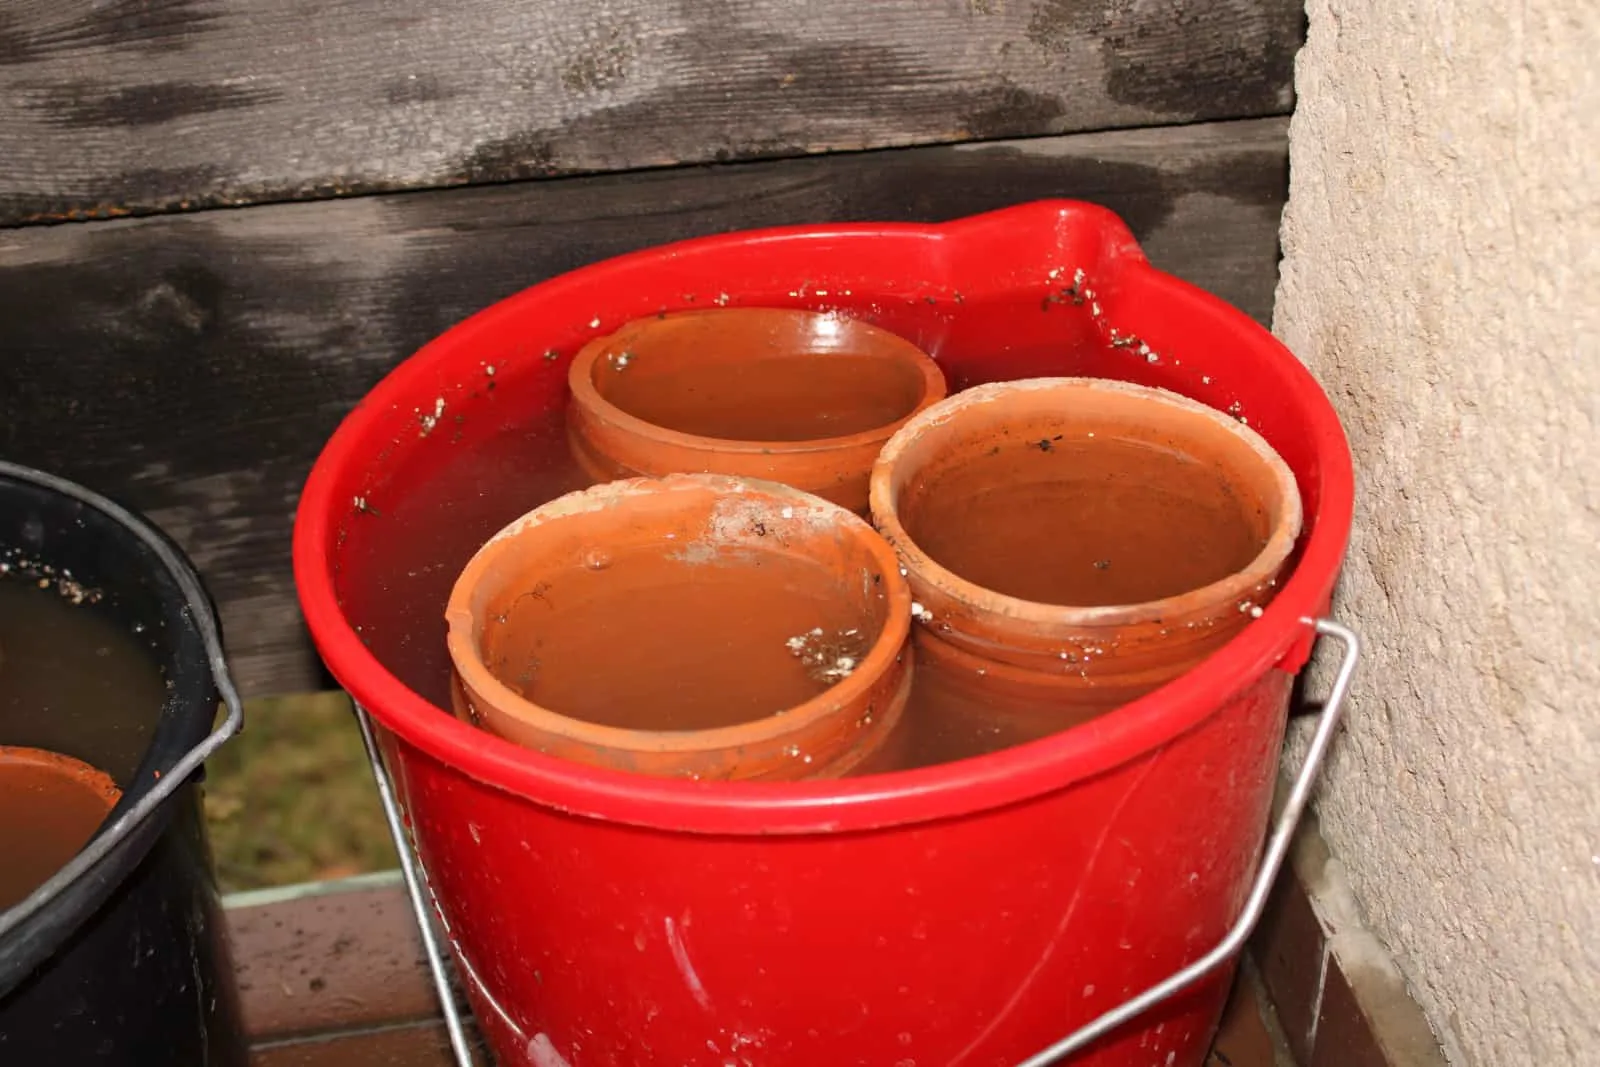 Old flower pots being soaked in a bucket with water, cleaning of old clay, ceramic, terracotta flower pots